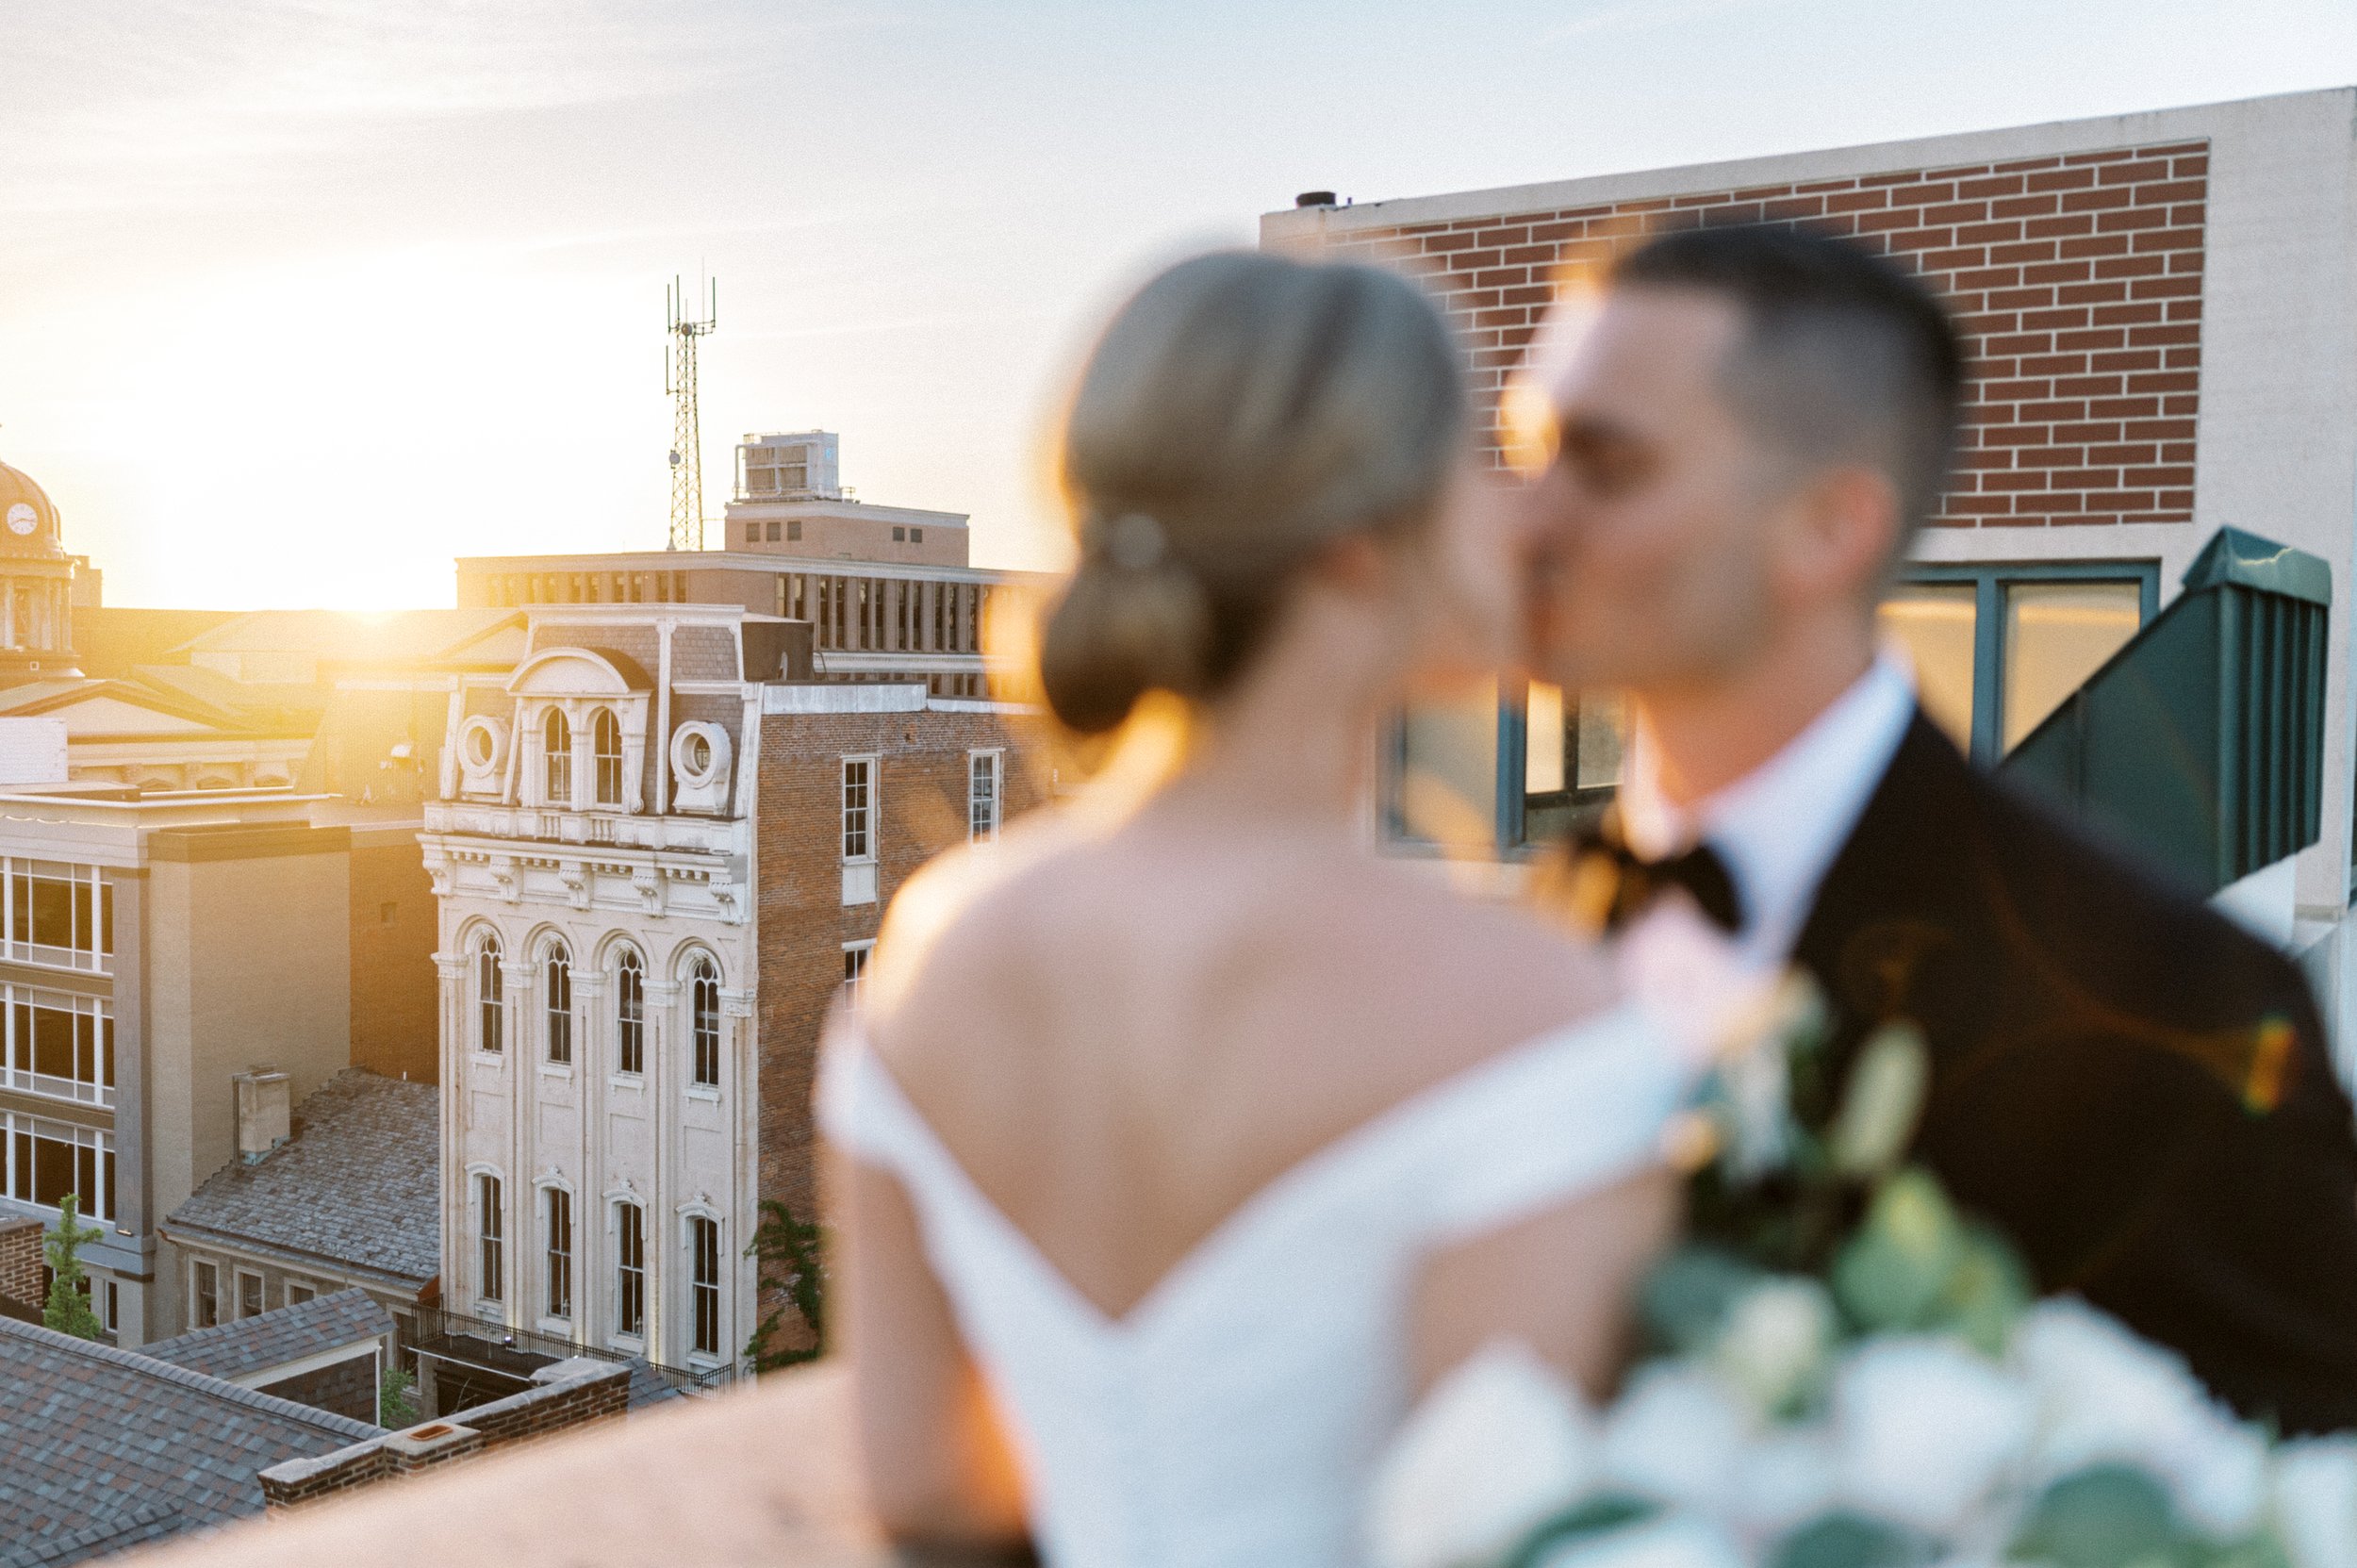 Bride and groom kissing out of focus in front of Excelsior exterior front facade at sunset